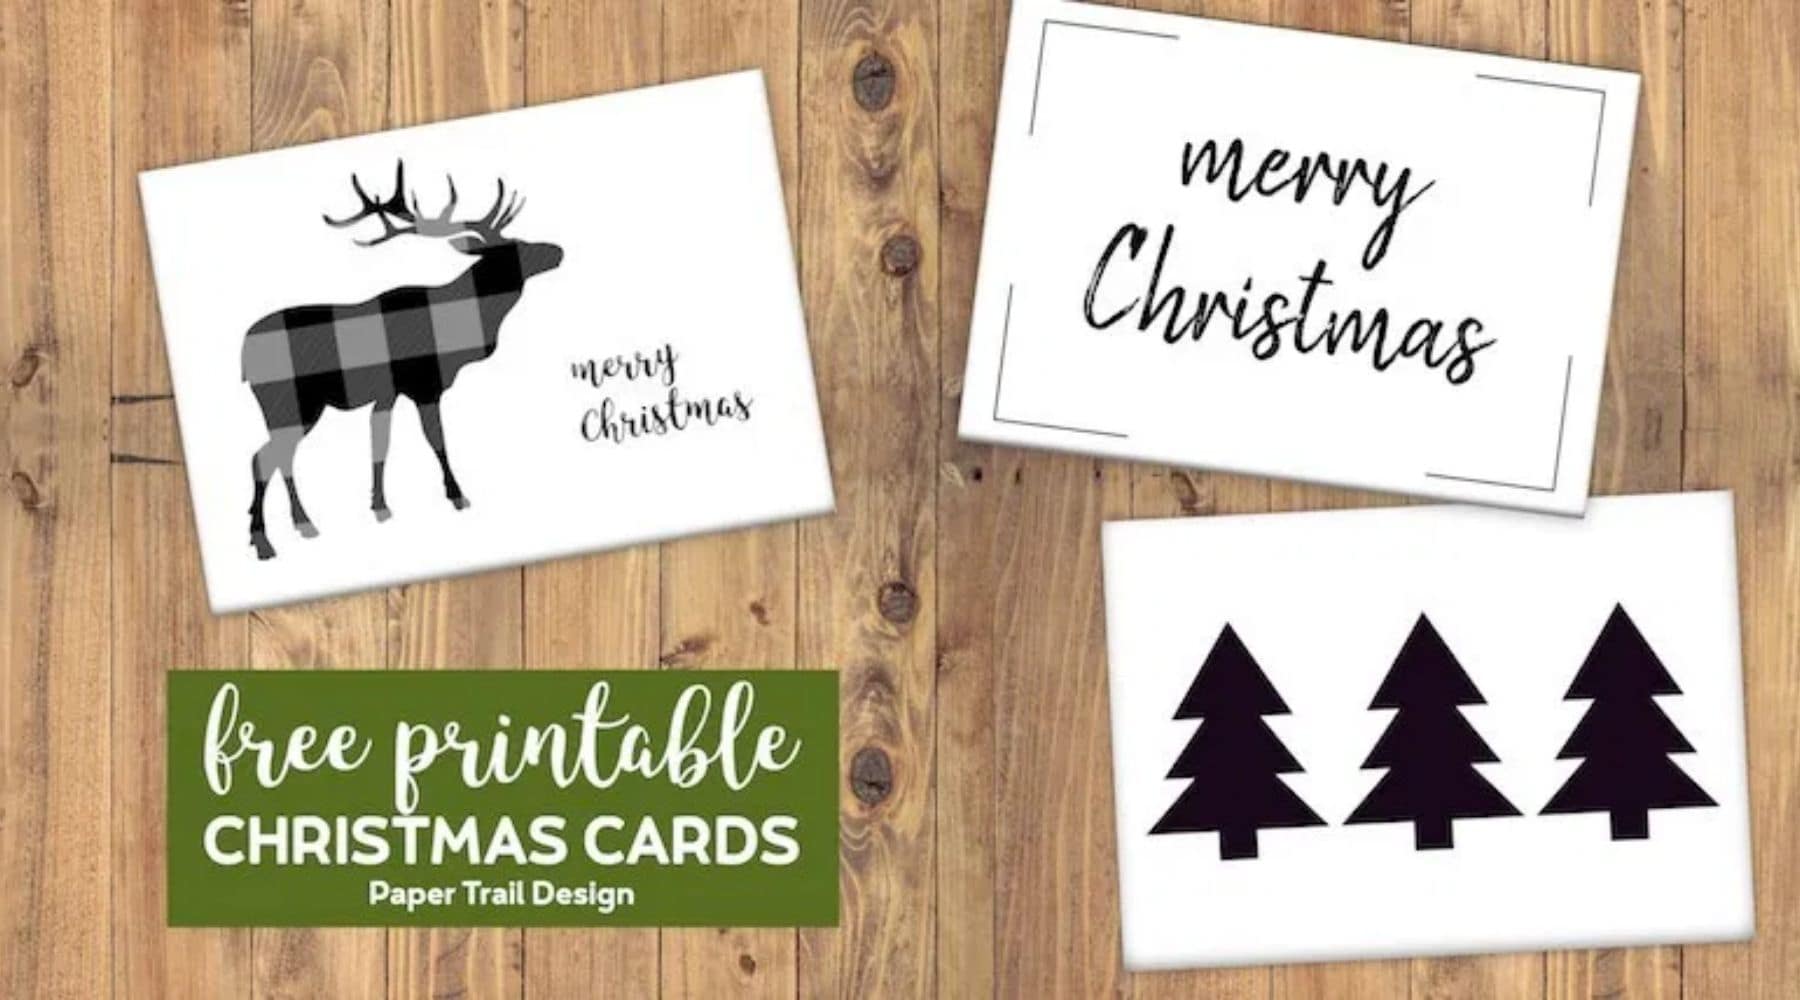 Free Printable Christmas Cards To Send To Everyone You Know - Run To  Radiance